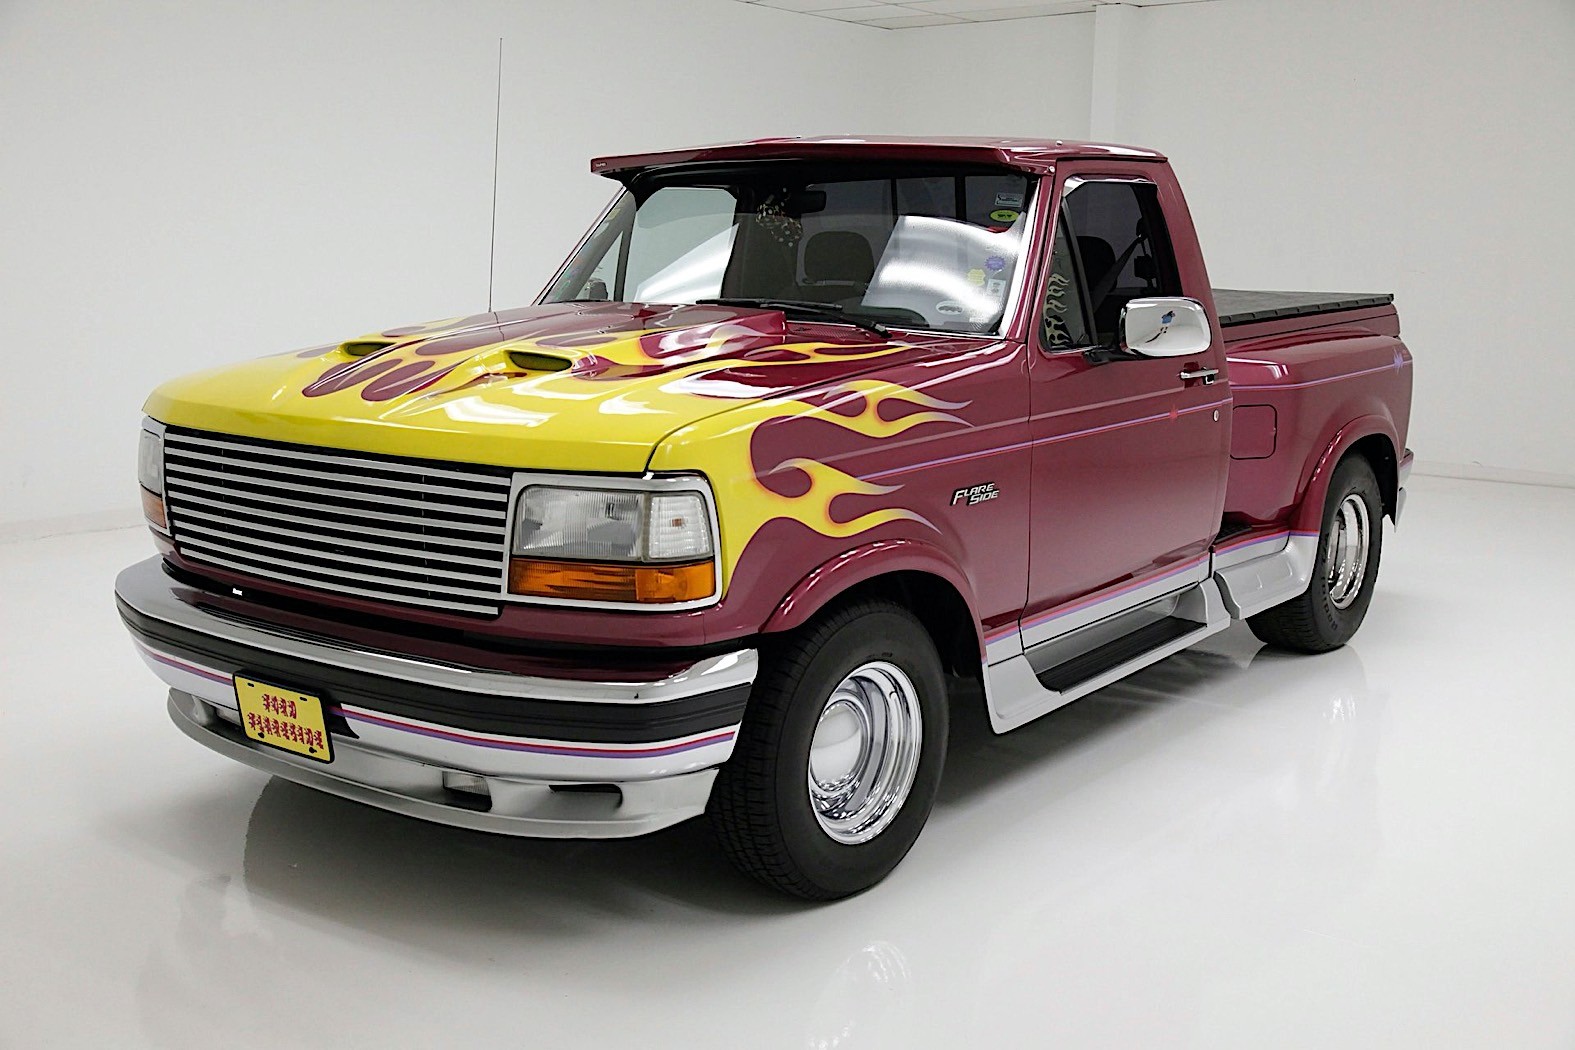 Custom 1992 Ford F-150 Flareside Pickup Is the Weird Duckling of the